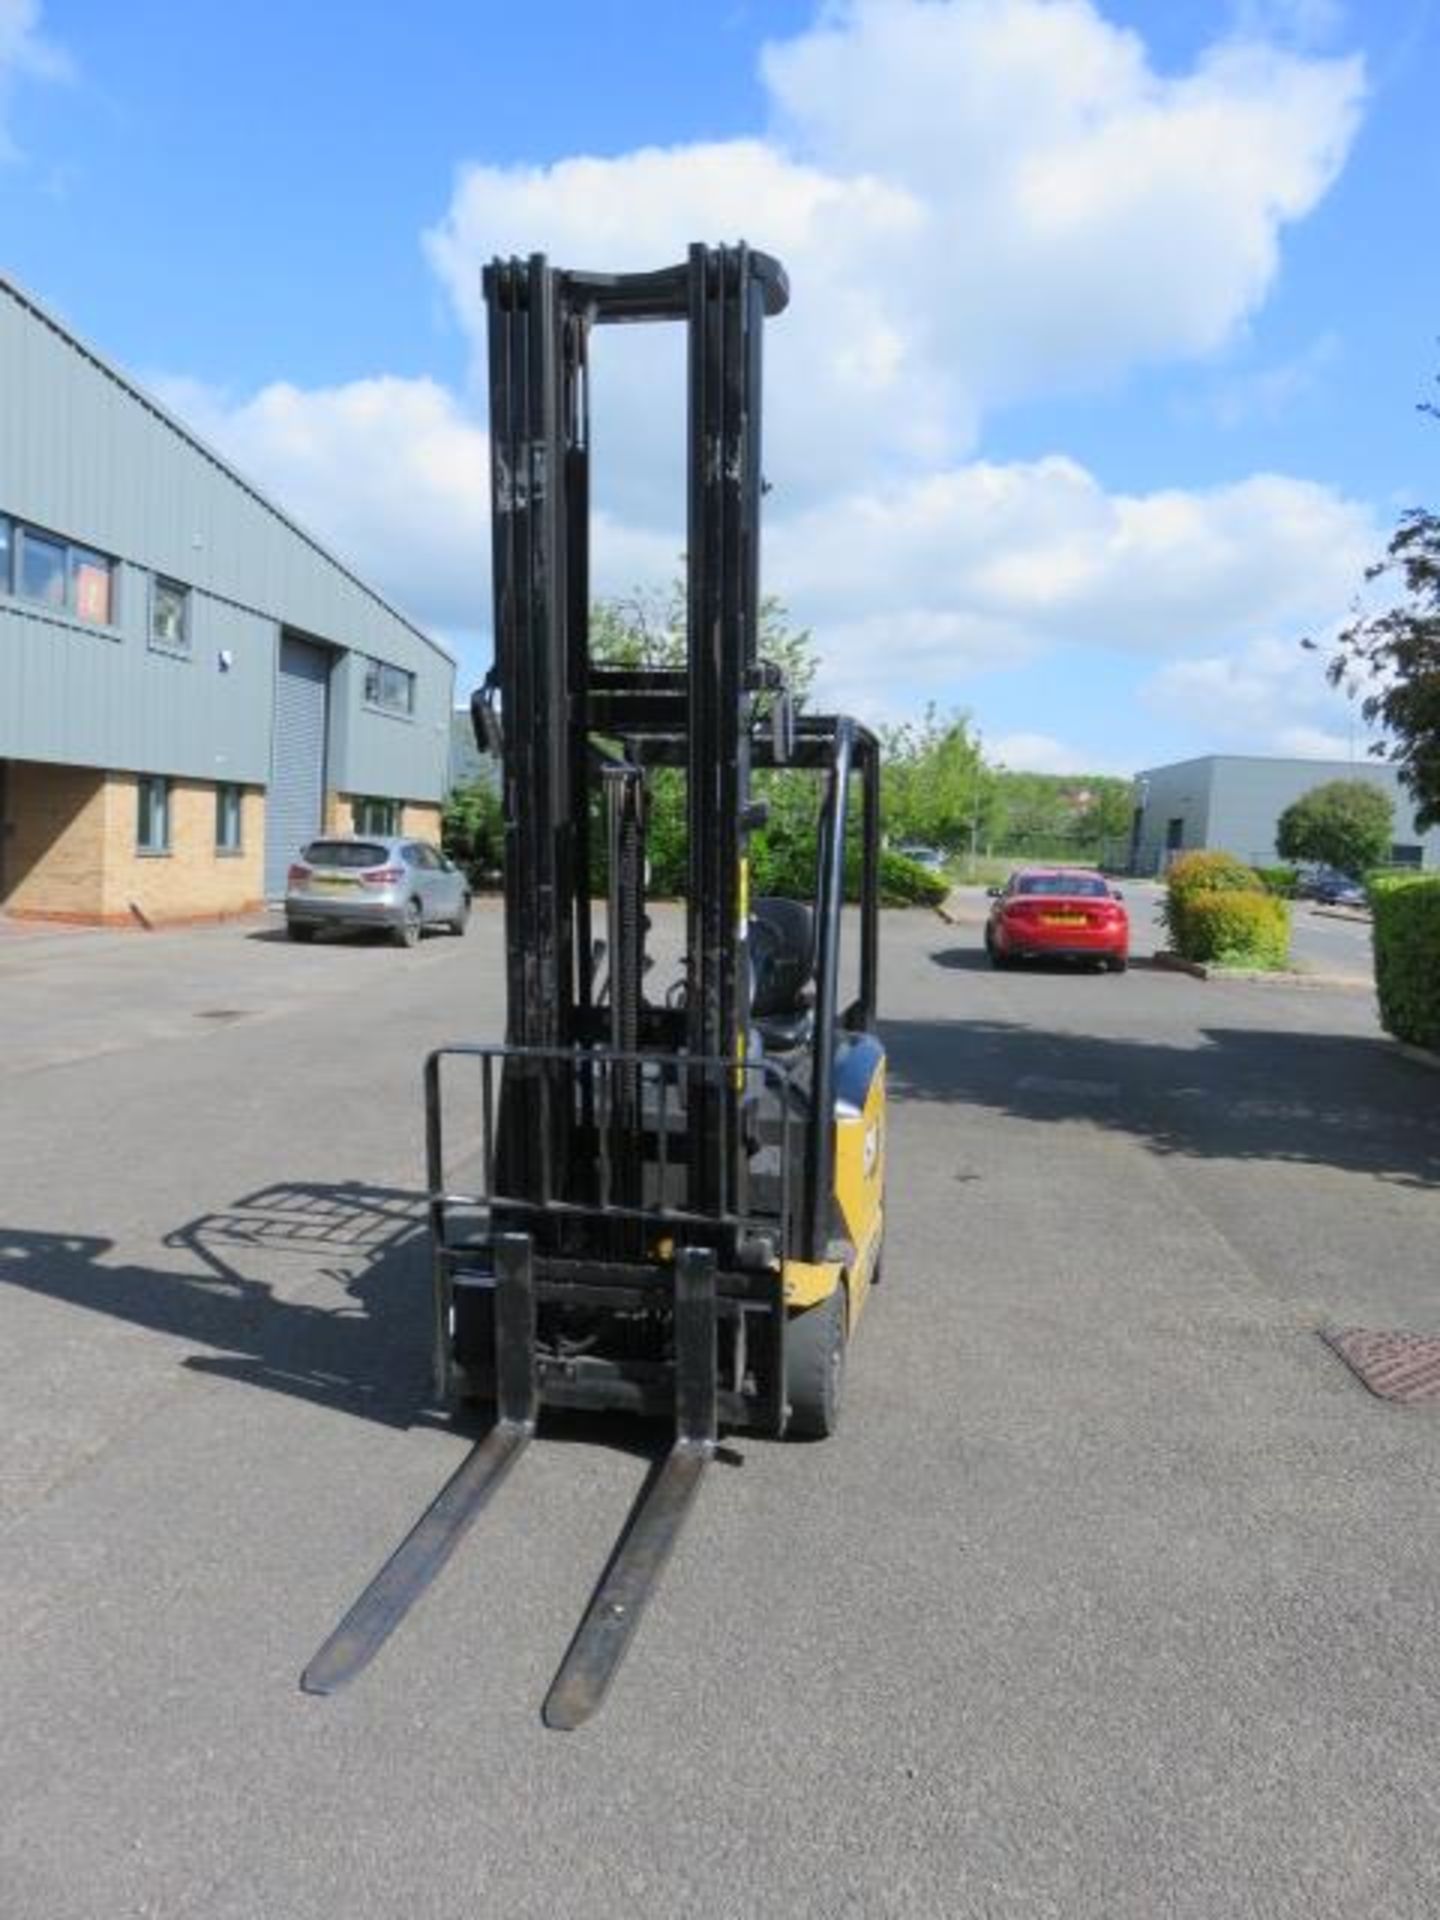 1, Caterpillar EP18 CAN Electric Forklift Truck, Serial No. ETB27A 50102 (2020) with 1800kg Capacit